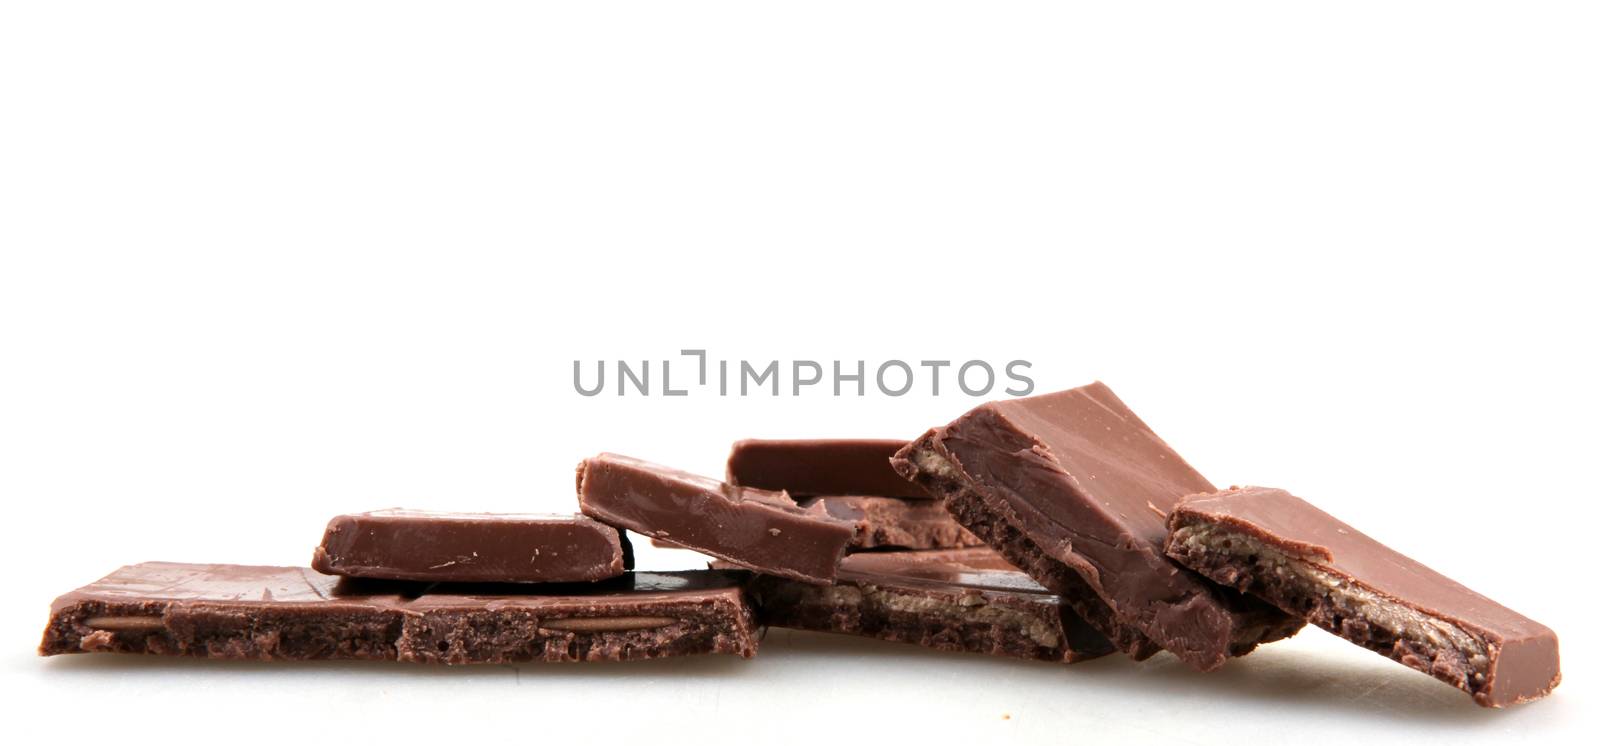 Chocolate Isolated On White by nenov